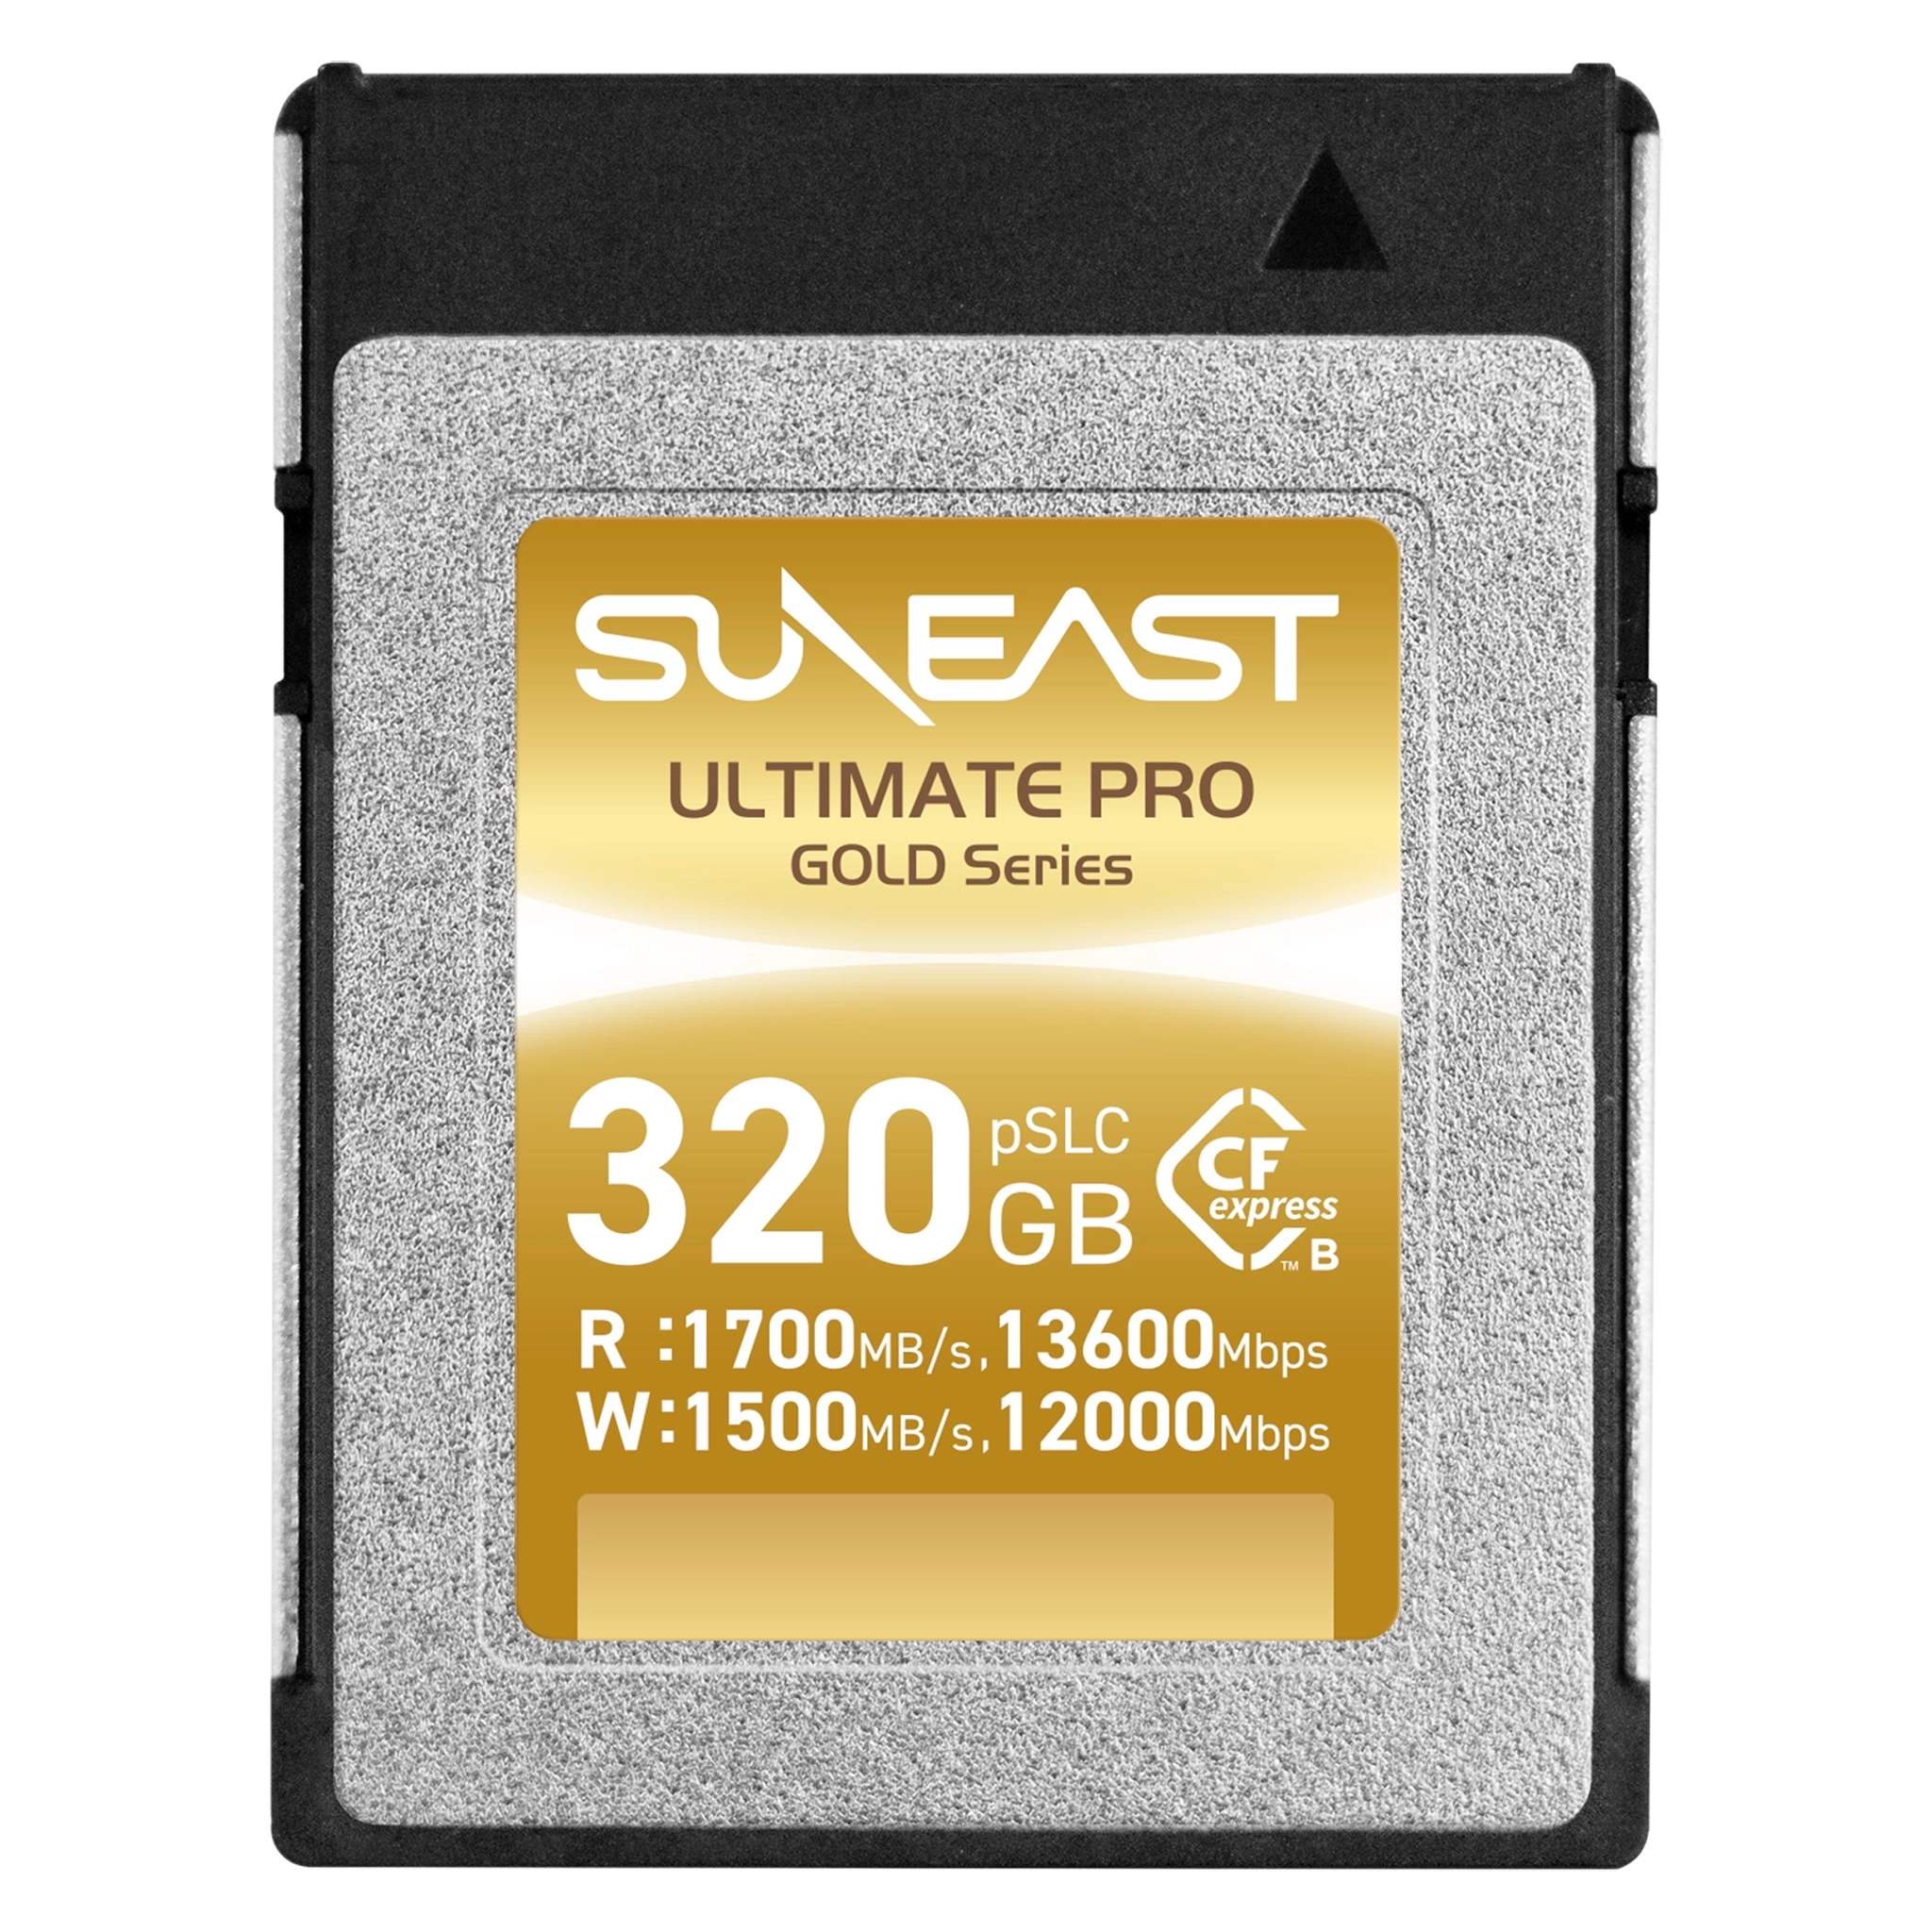 ULTIMATE PRO CFexpress Type B Card【GOLD Series】320GB - SUNEAST 